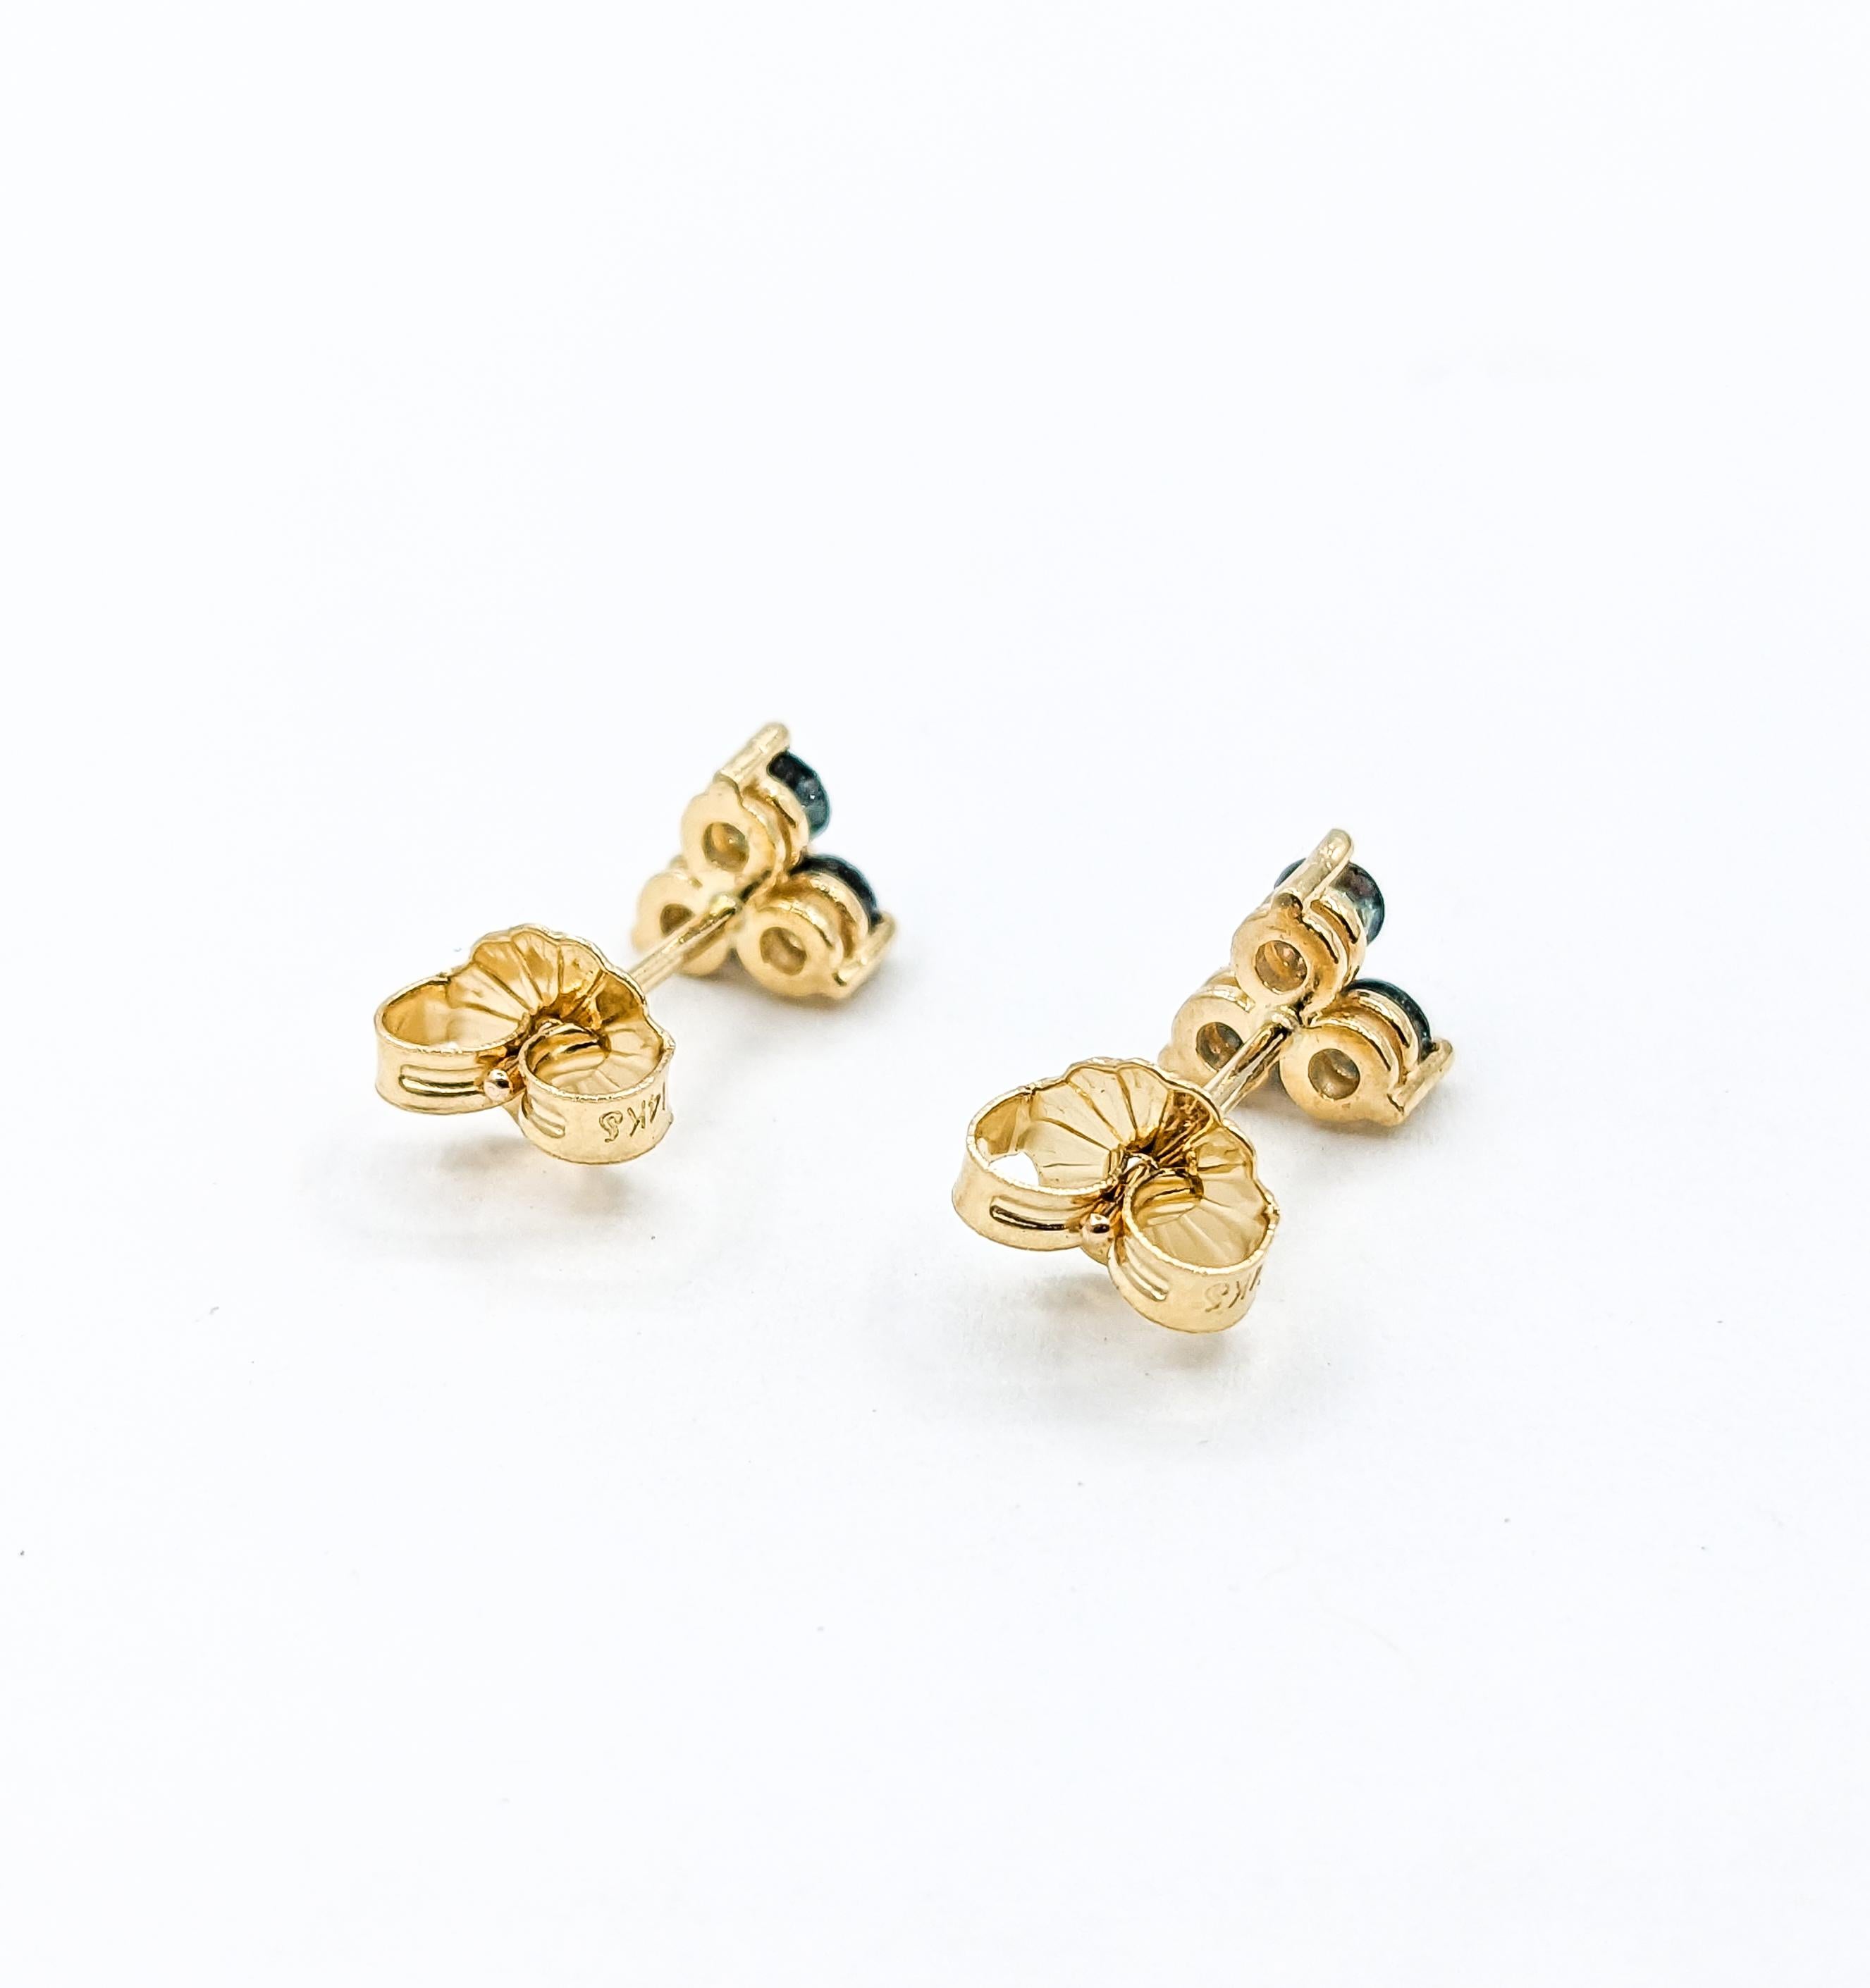 Natural Brazilian Alexandrite Stud Earrings in Yellow Gold For Sale 1